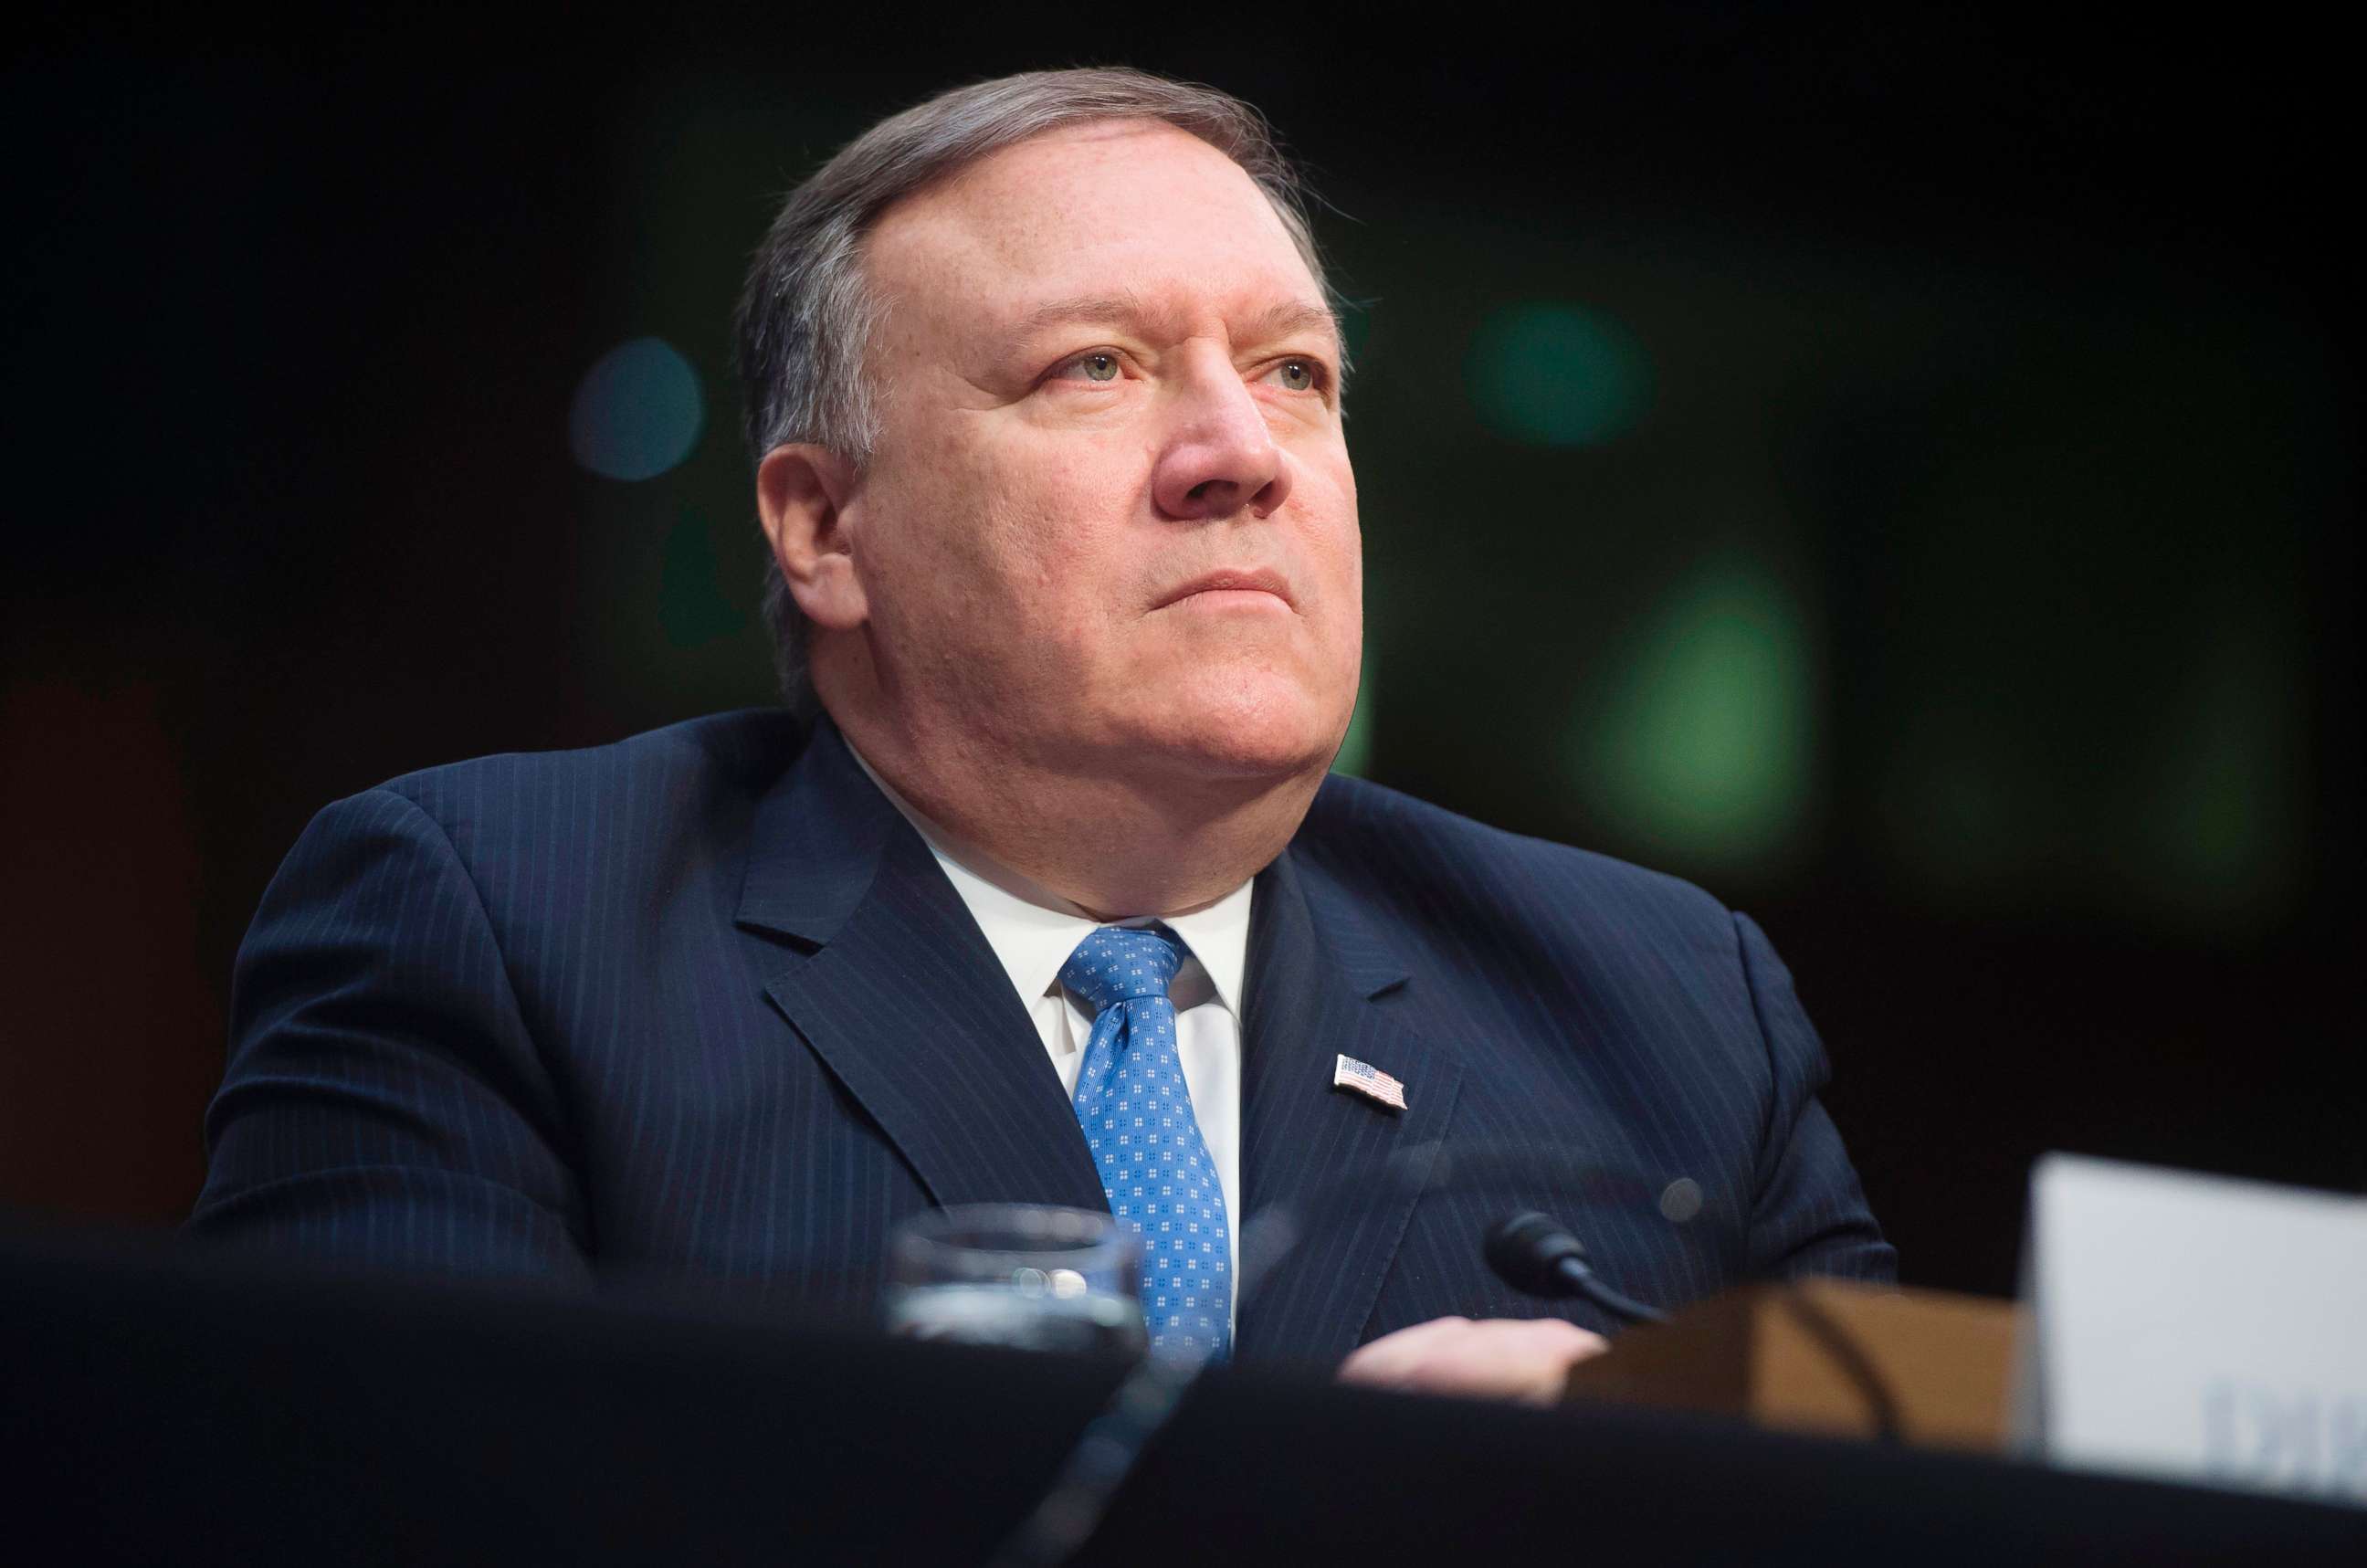 PHOTO: CIA Director Mike Pompeo testifies on worldwide threats during a Senate Intelligence Committee hearing on Capitol Hill on Feb. 13, 2018.